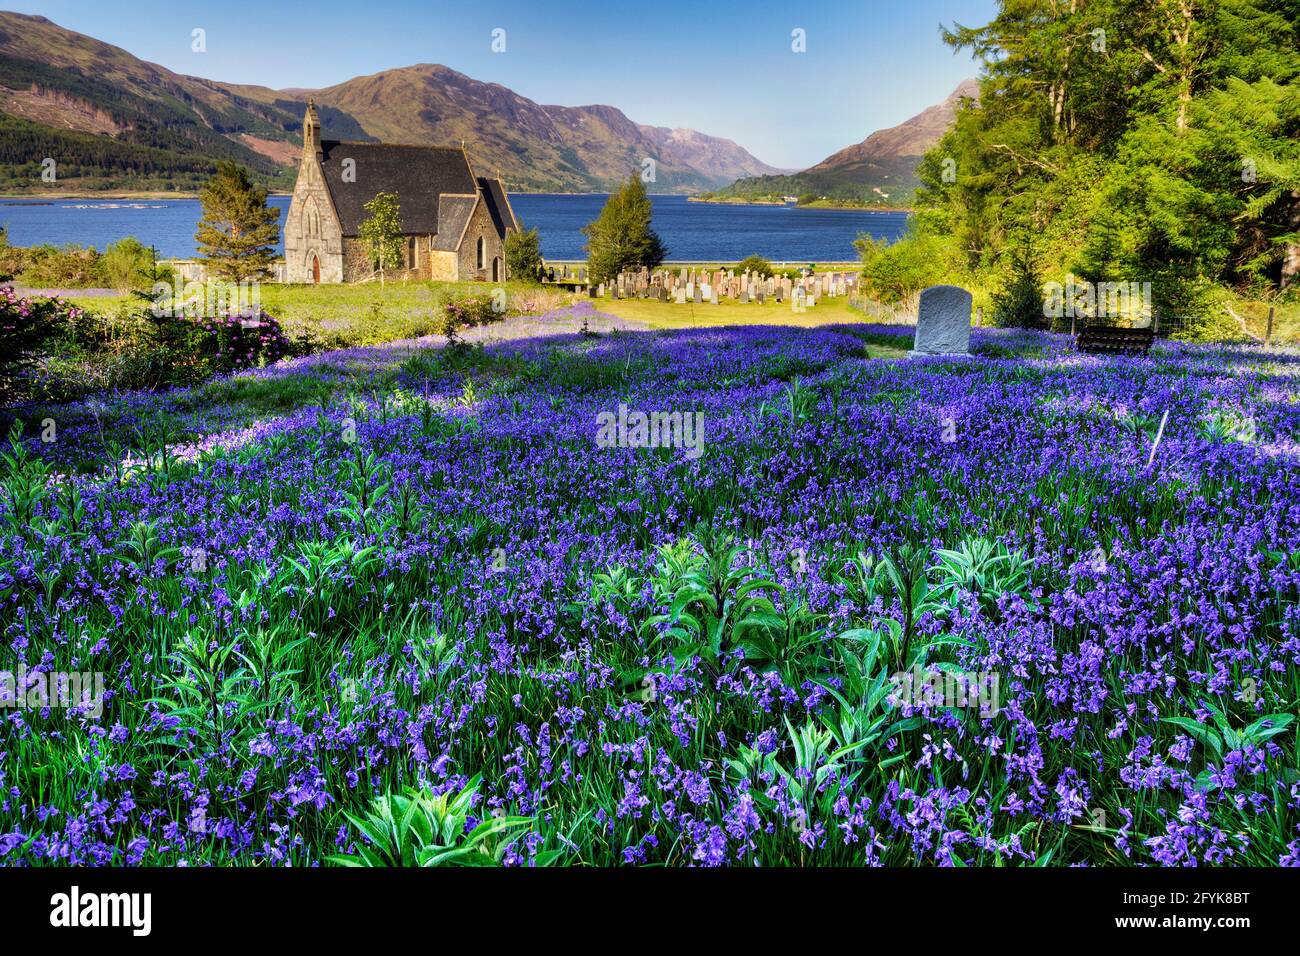 Amazing bluebells at St john's church in Ballachulish, a village by the shore of Loch Leven in Scotland. Stock Photo